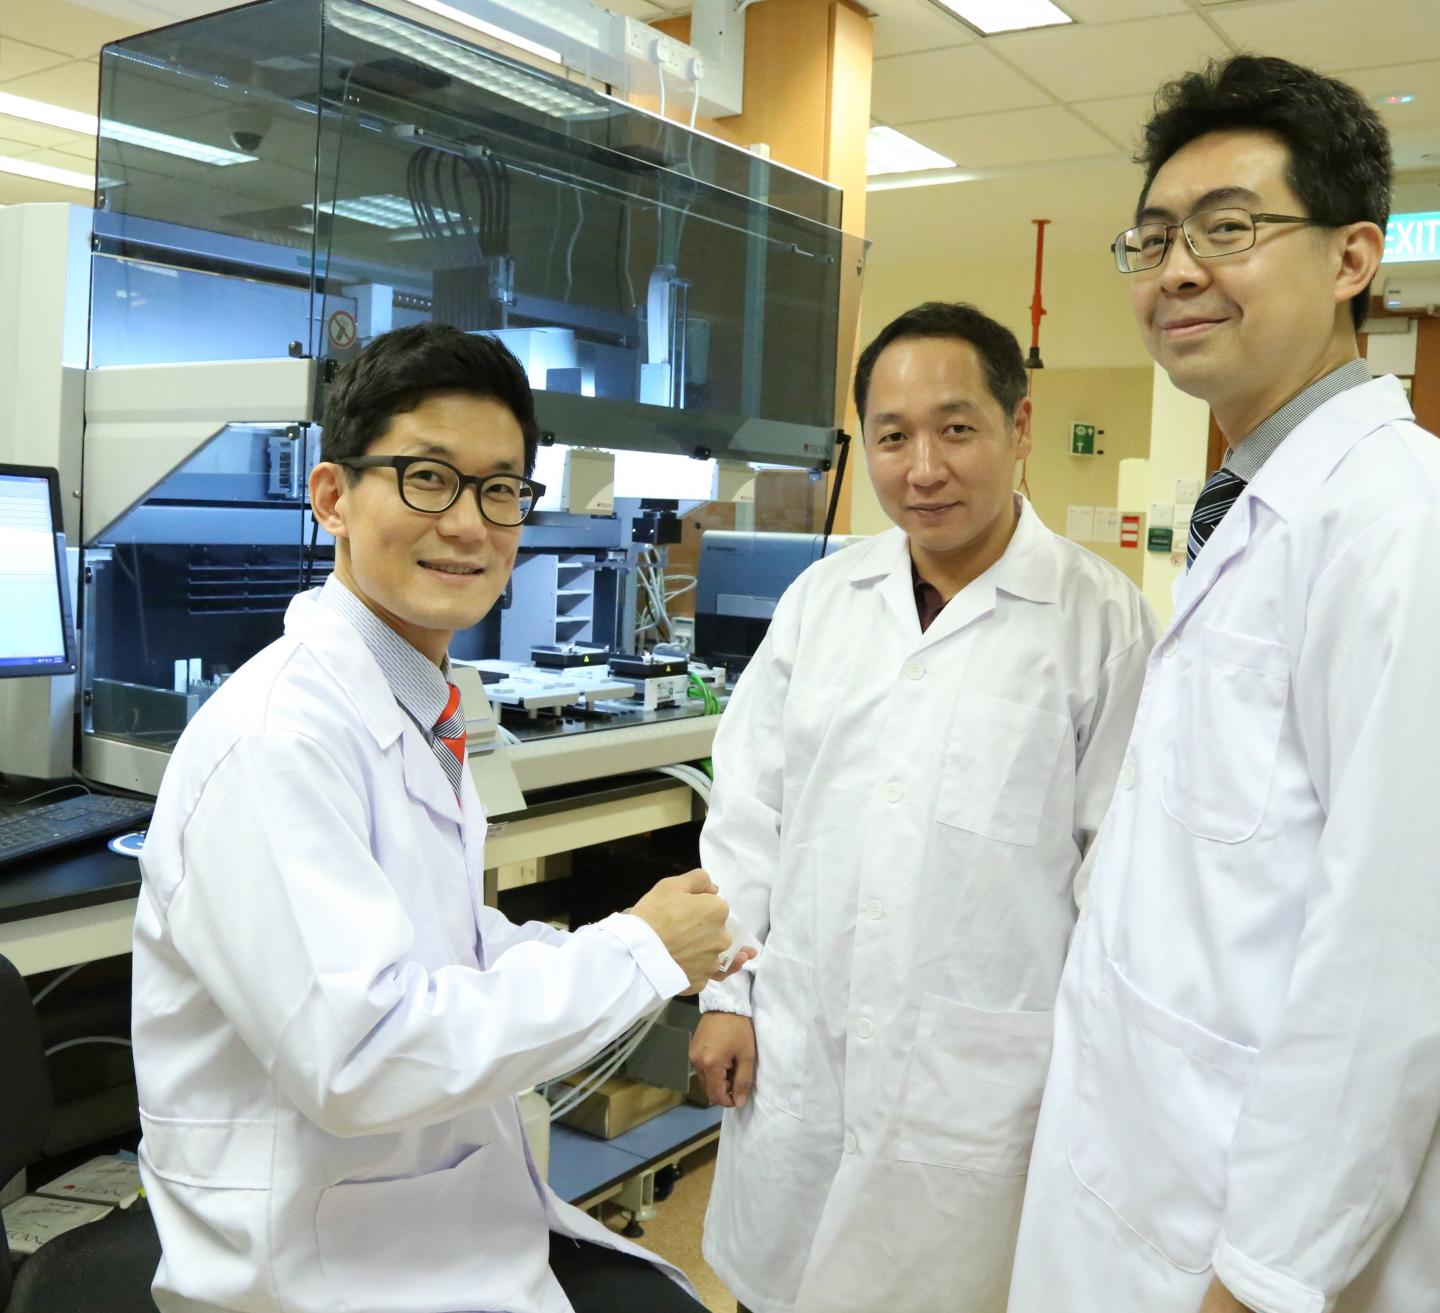 NUS Synthetic Biology for Clinical and Technological Innovation